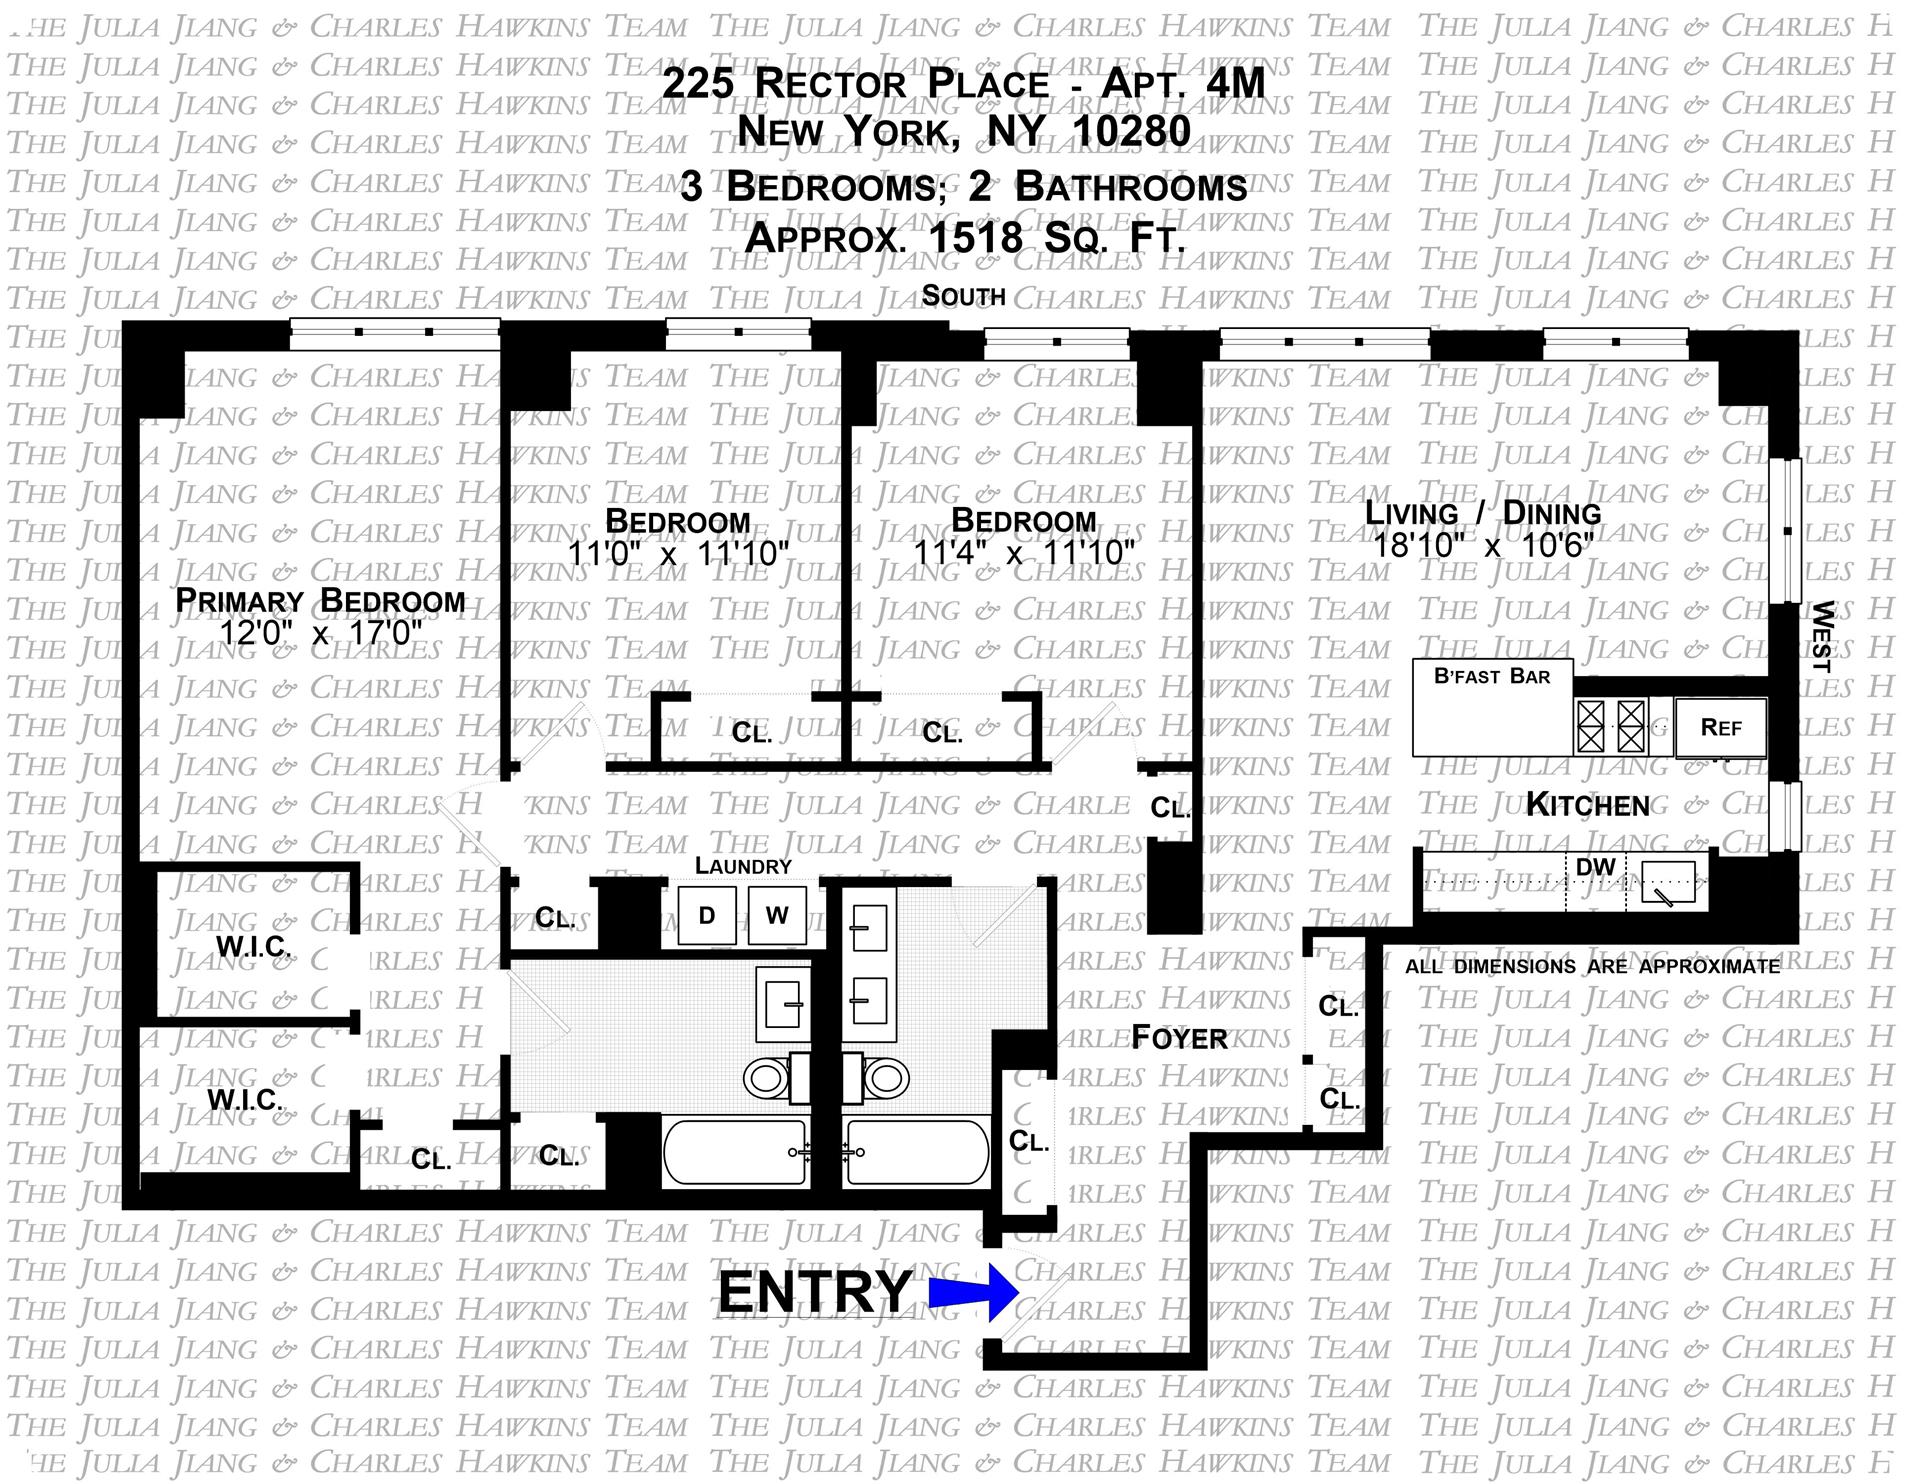 Floorplan for 225 Rector Place, 4M